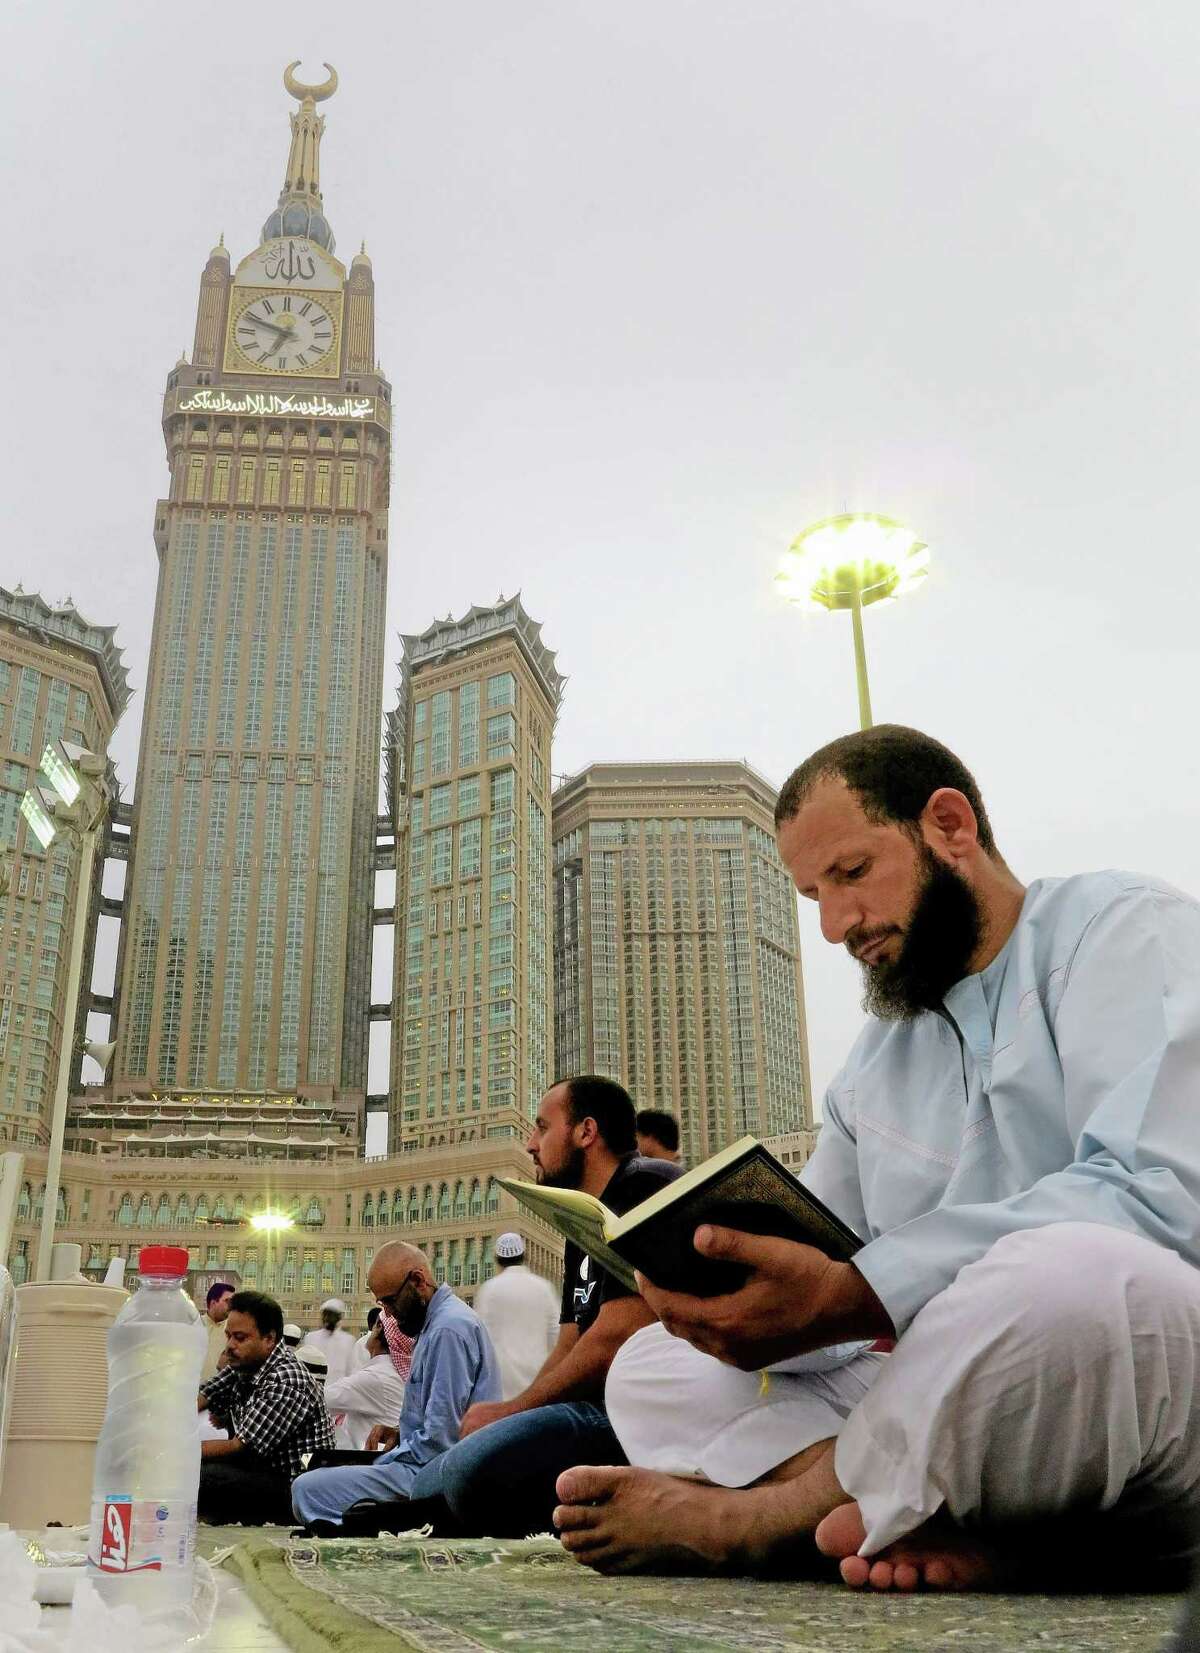 A worshipper reads Islam’s holy book Quran at the Grand Mosque in the holy Muslim city of Mecca, Saudi Arabia.